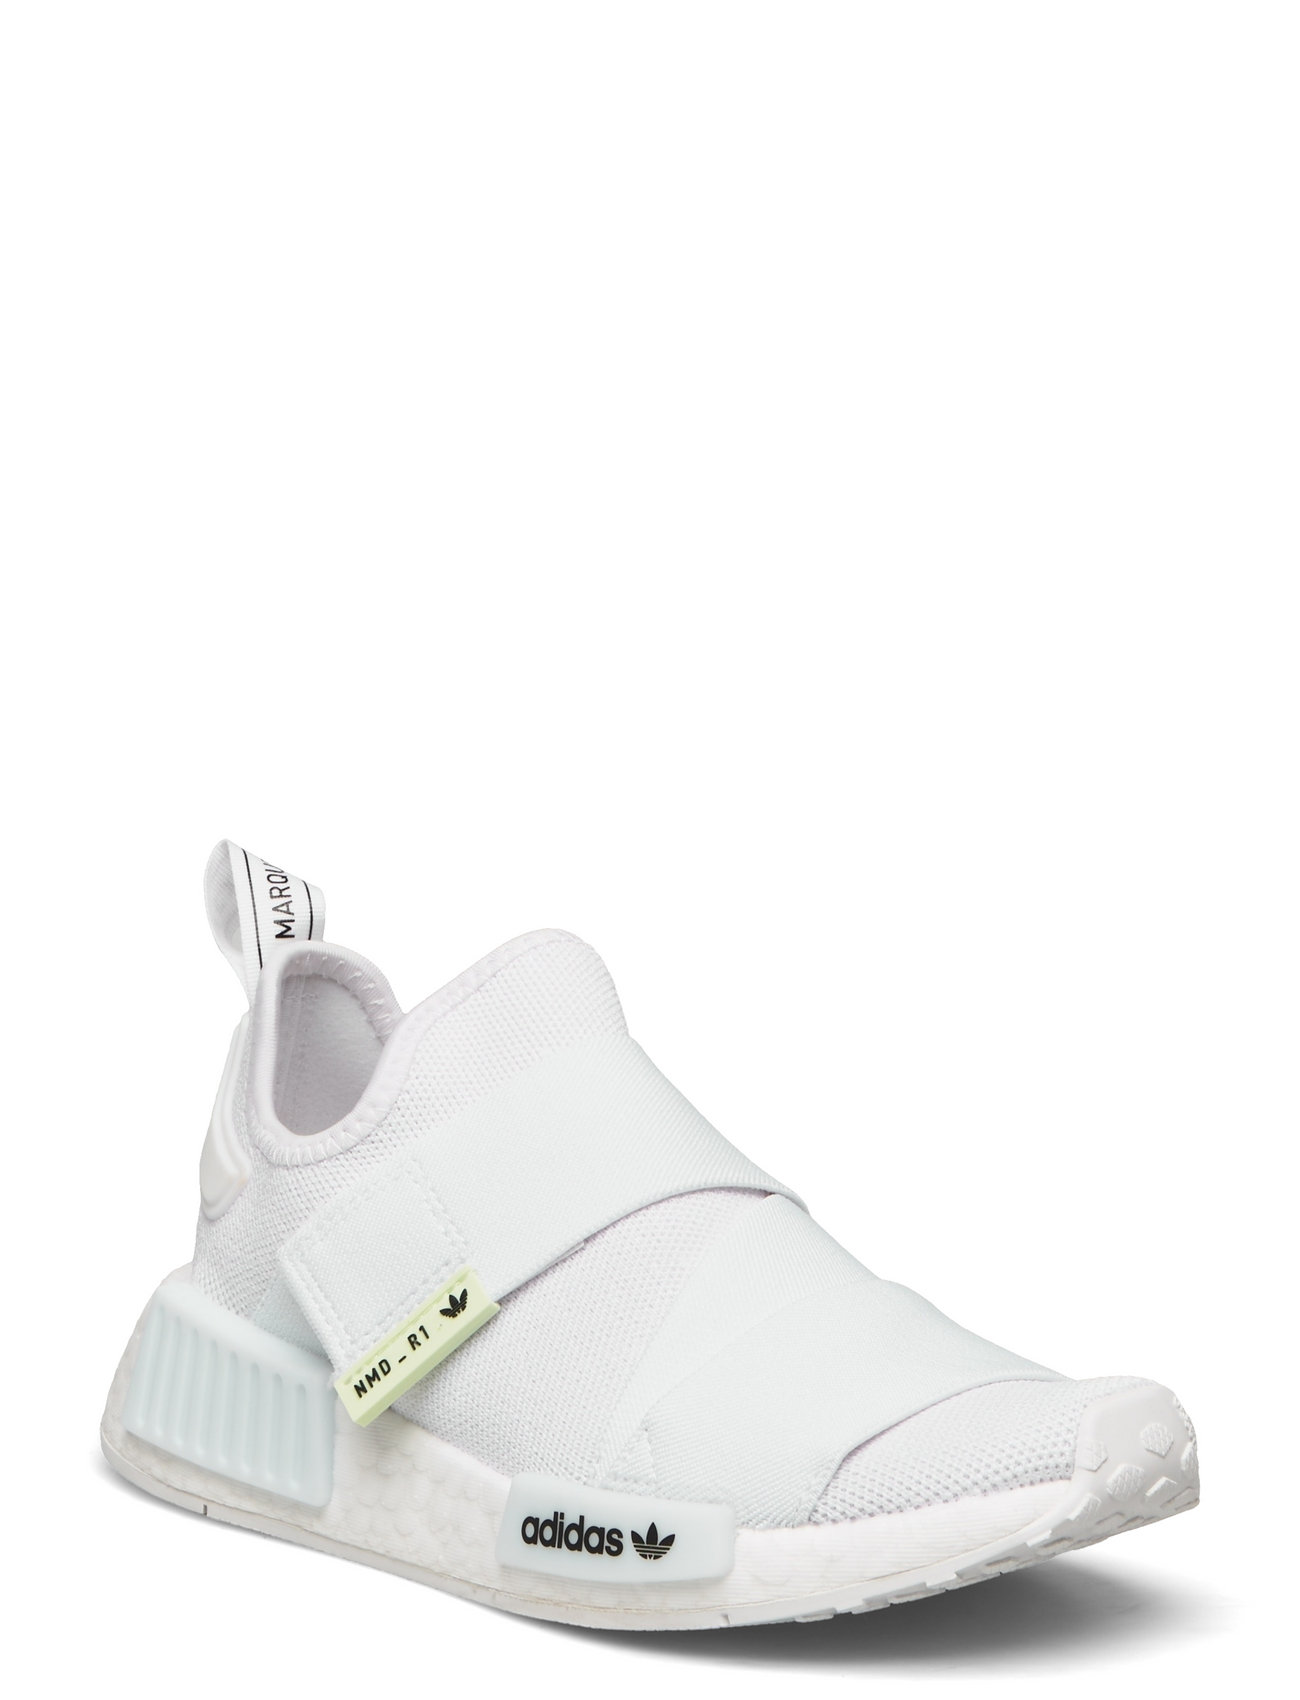 Nmd_R1 W Sport Sneakers Low-top Sneakers White Adidas Originals